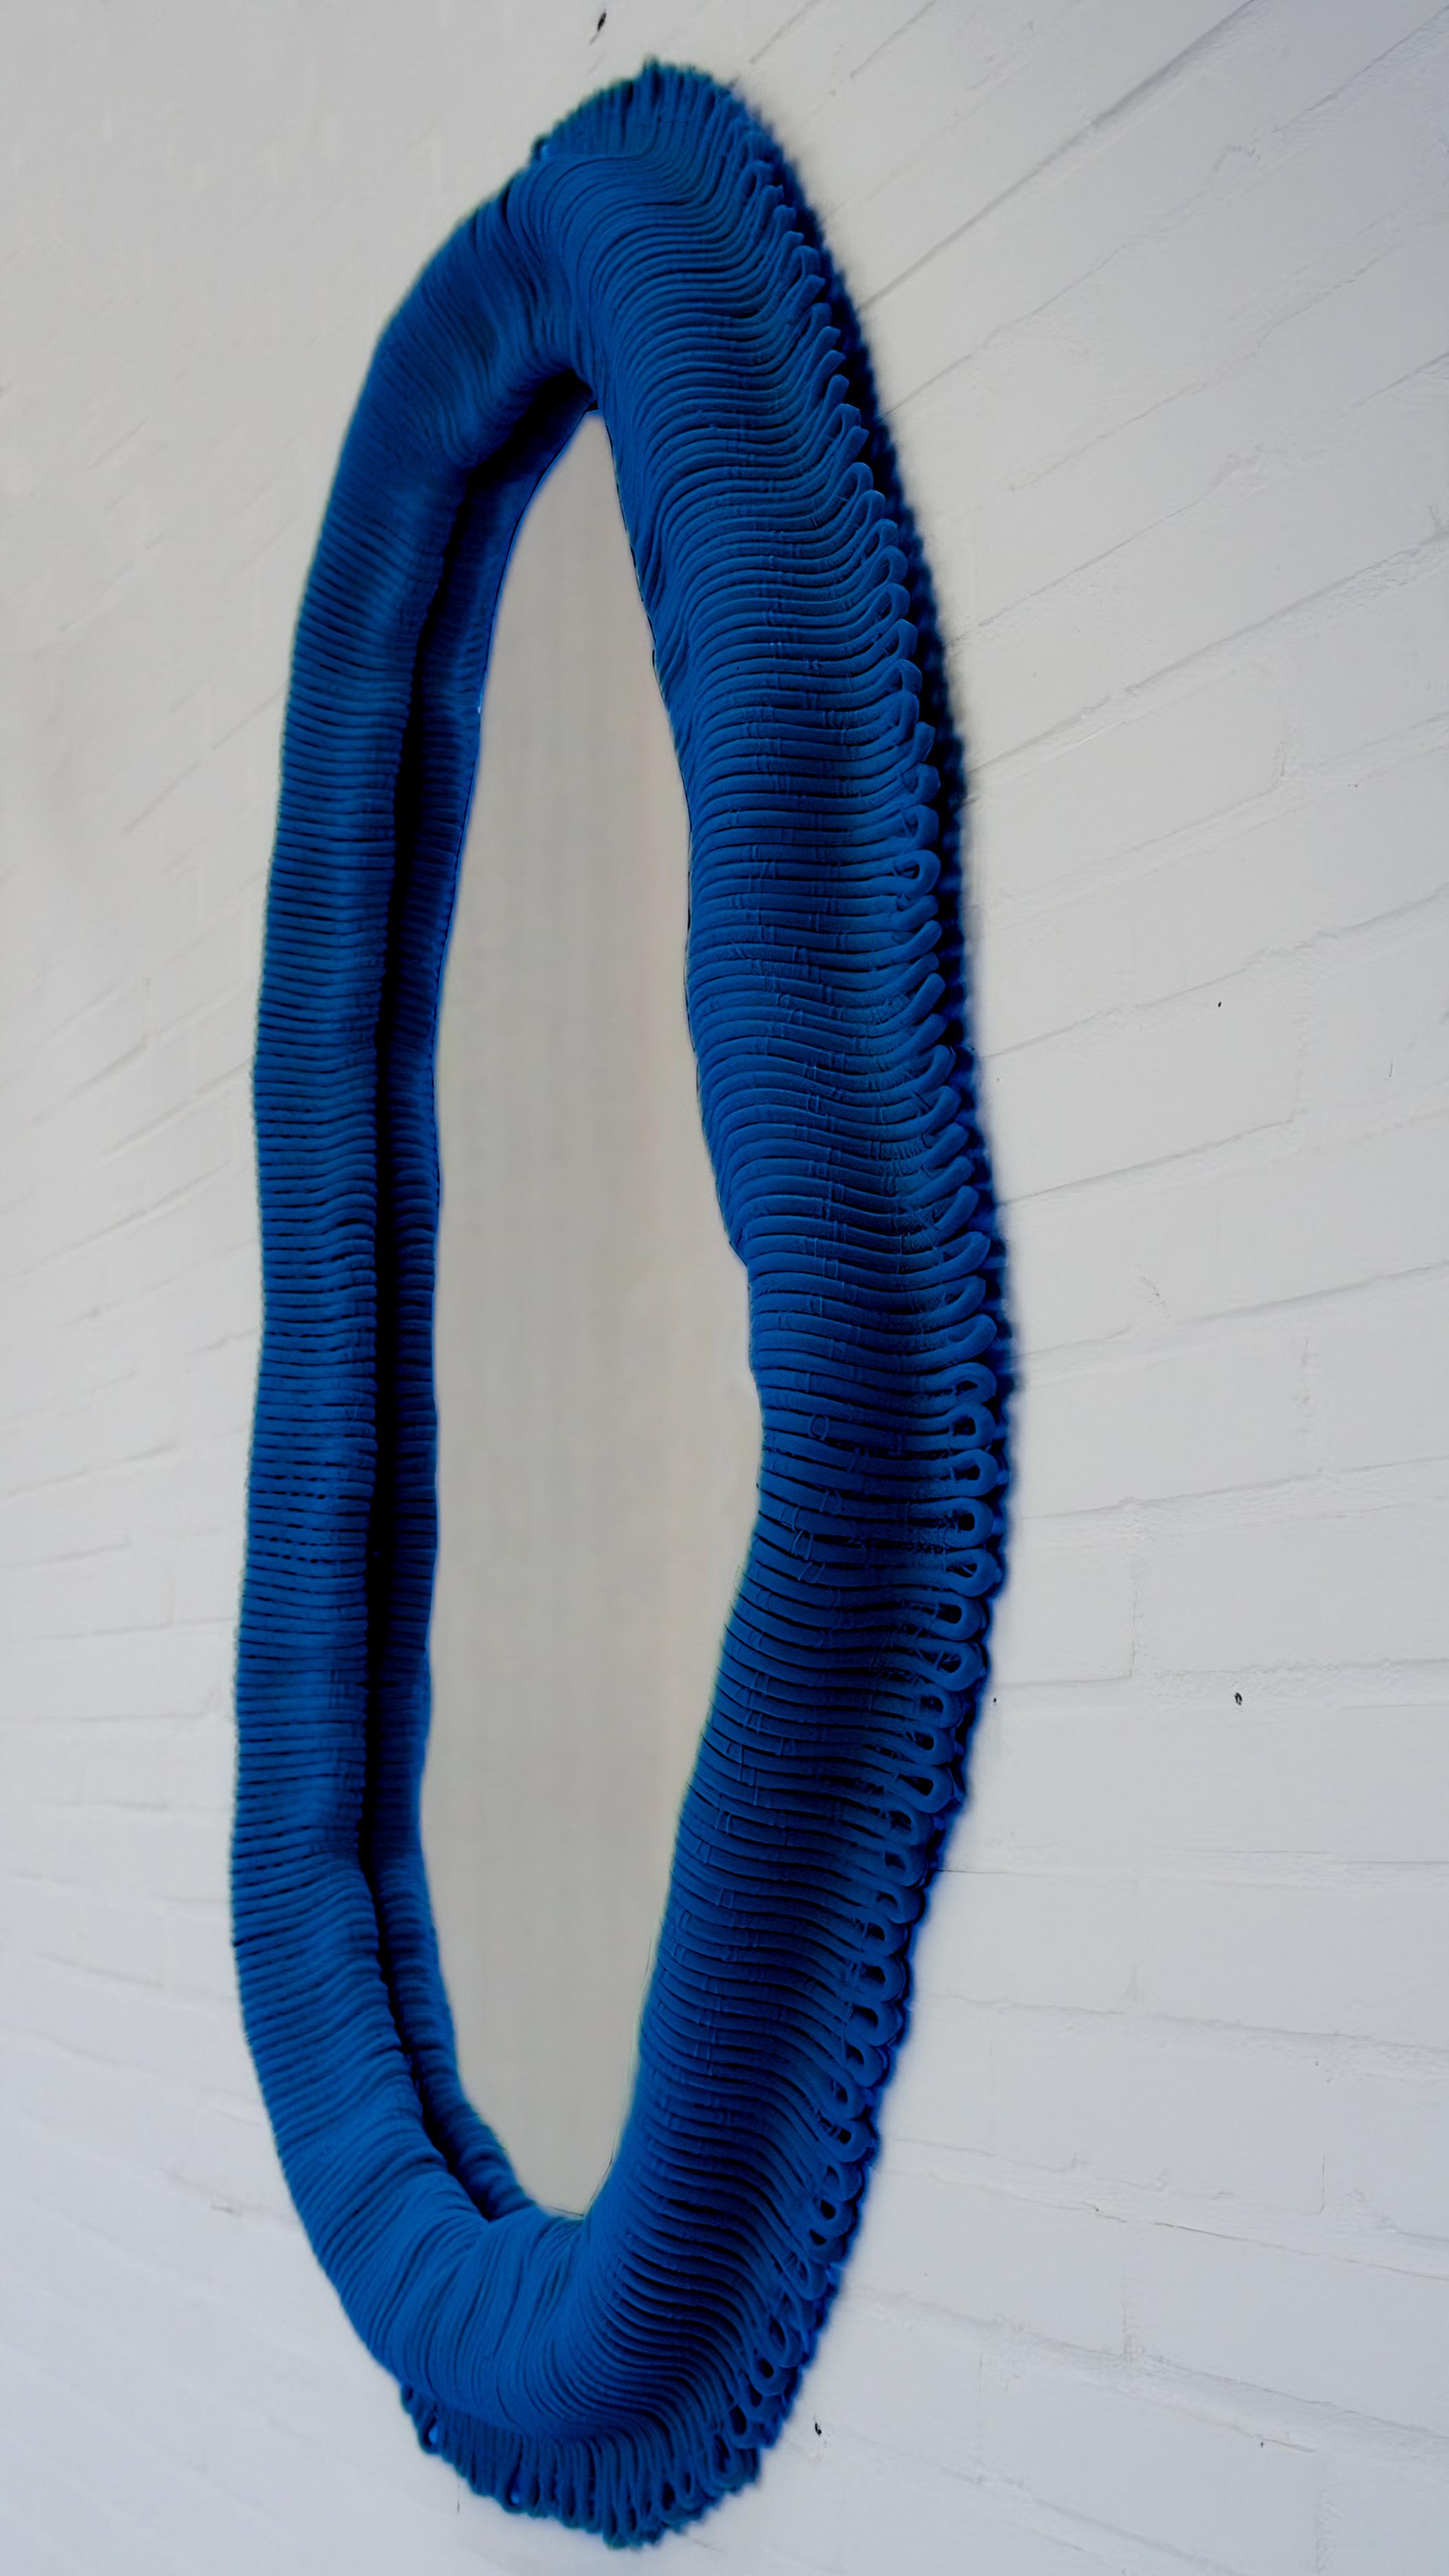 Knitted and woven textile made from com- bining high quality polypropelyne rope and parachute chord that is sculpted with epoxy to form a strong composite structure. Finished with a nylon fibre coating.

The Reef Series combines an innovative